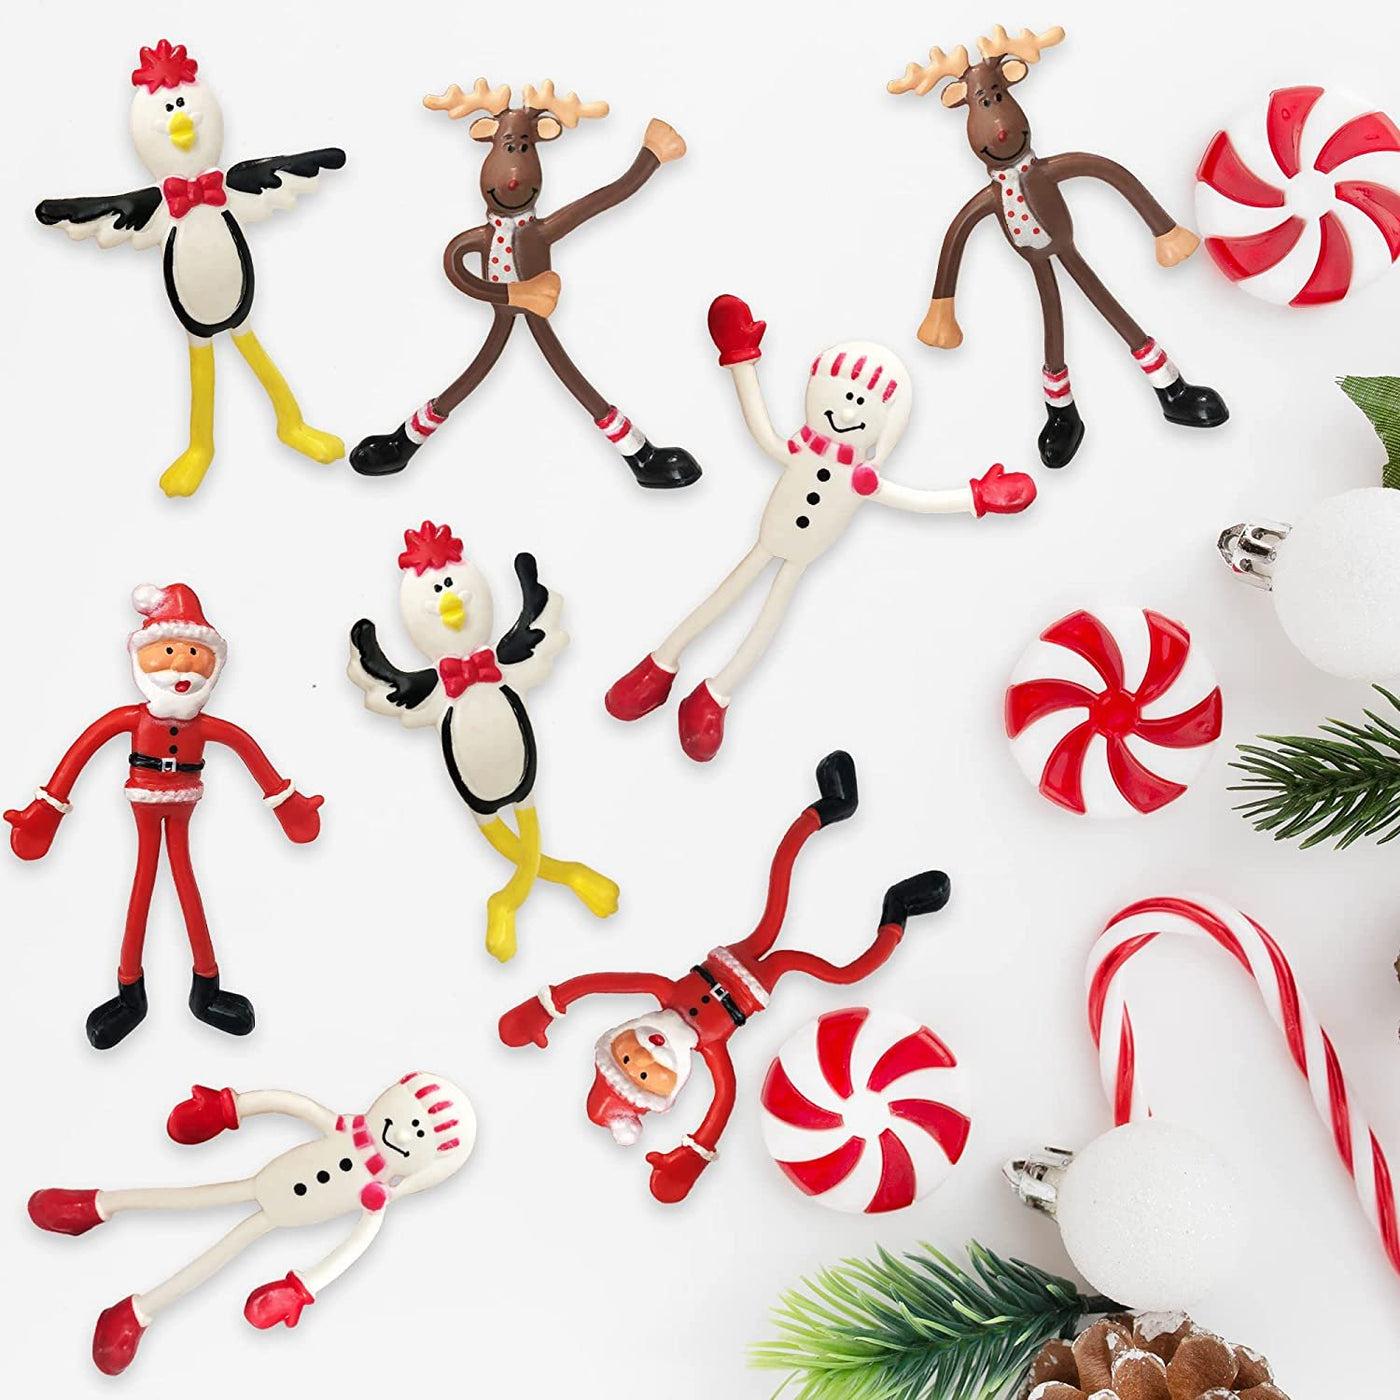 Christmas Bendable Figurines, Set of 12, Fidget Christmas Toys with Reindeer, Santa, Snowman, & Penguin Characters, Great as Christmas Party Favors and Holiday Stocking Stuffers for Kids